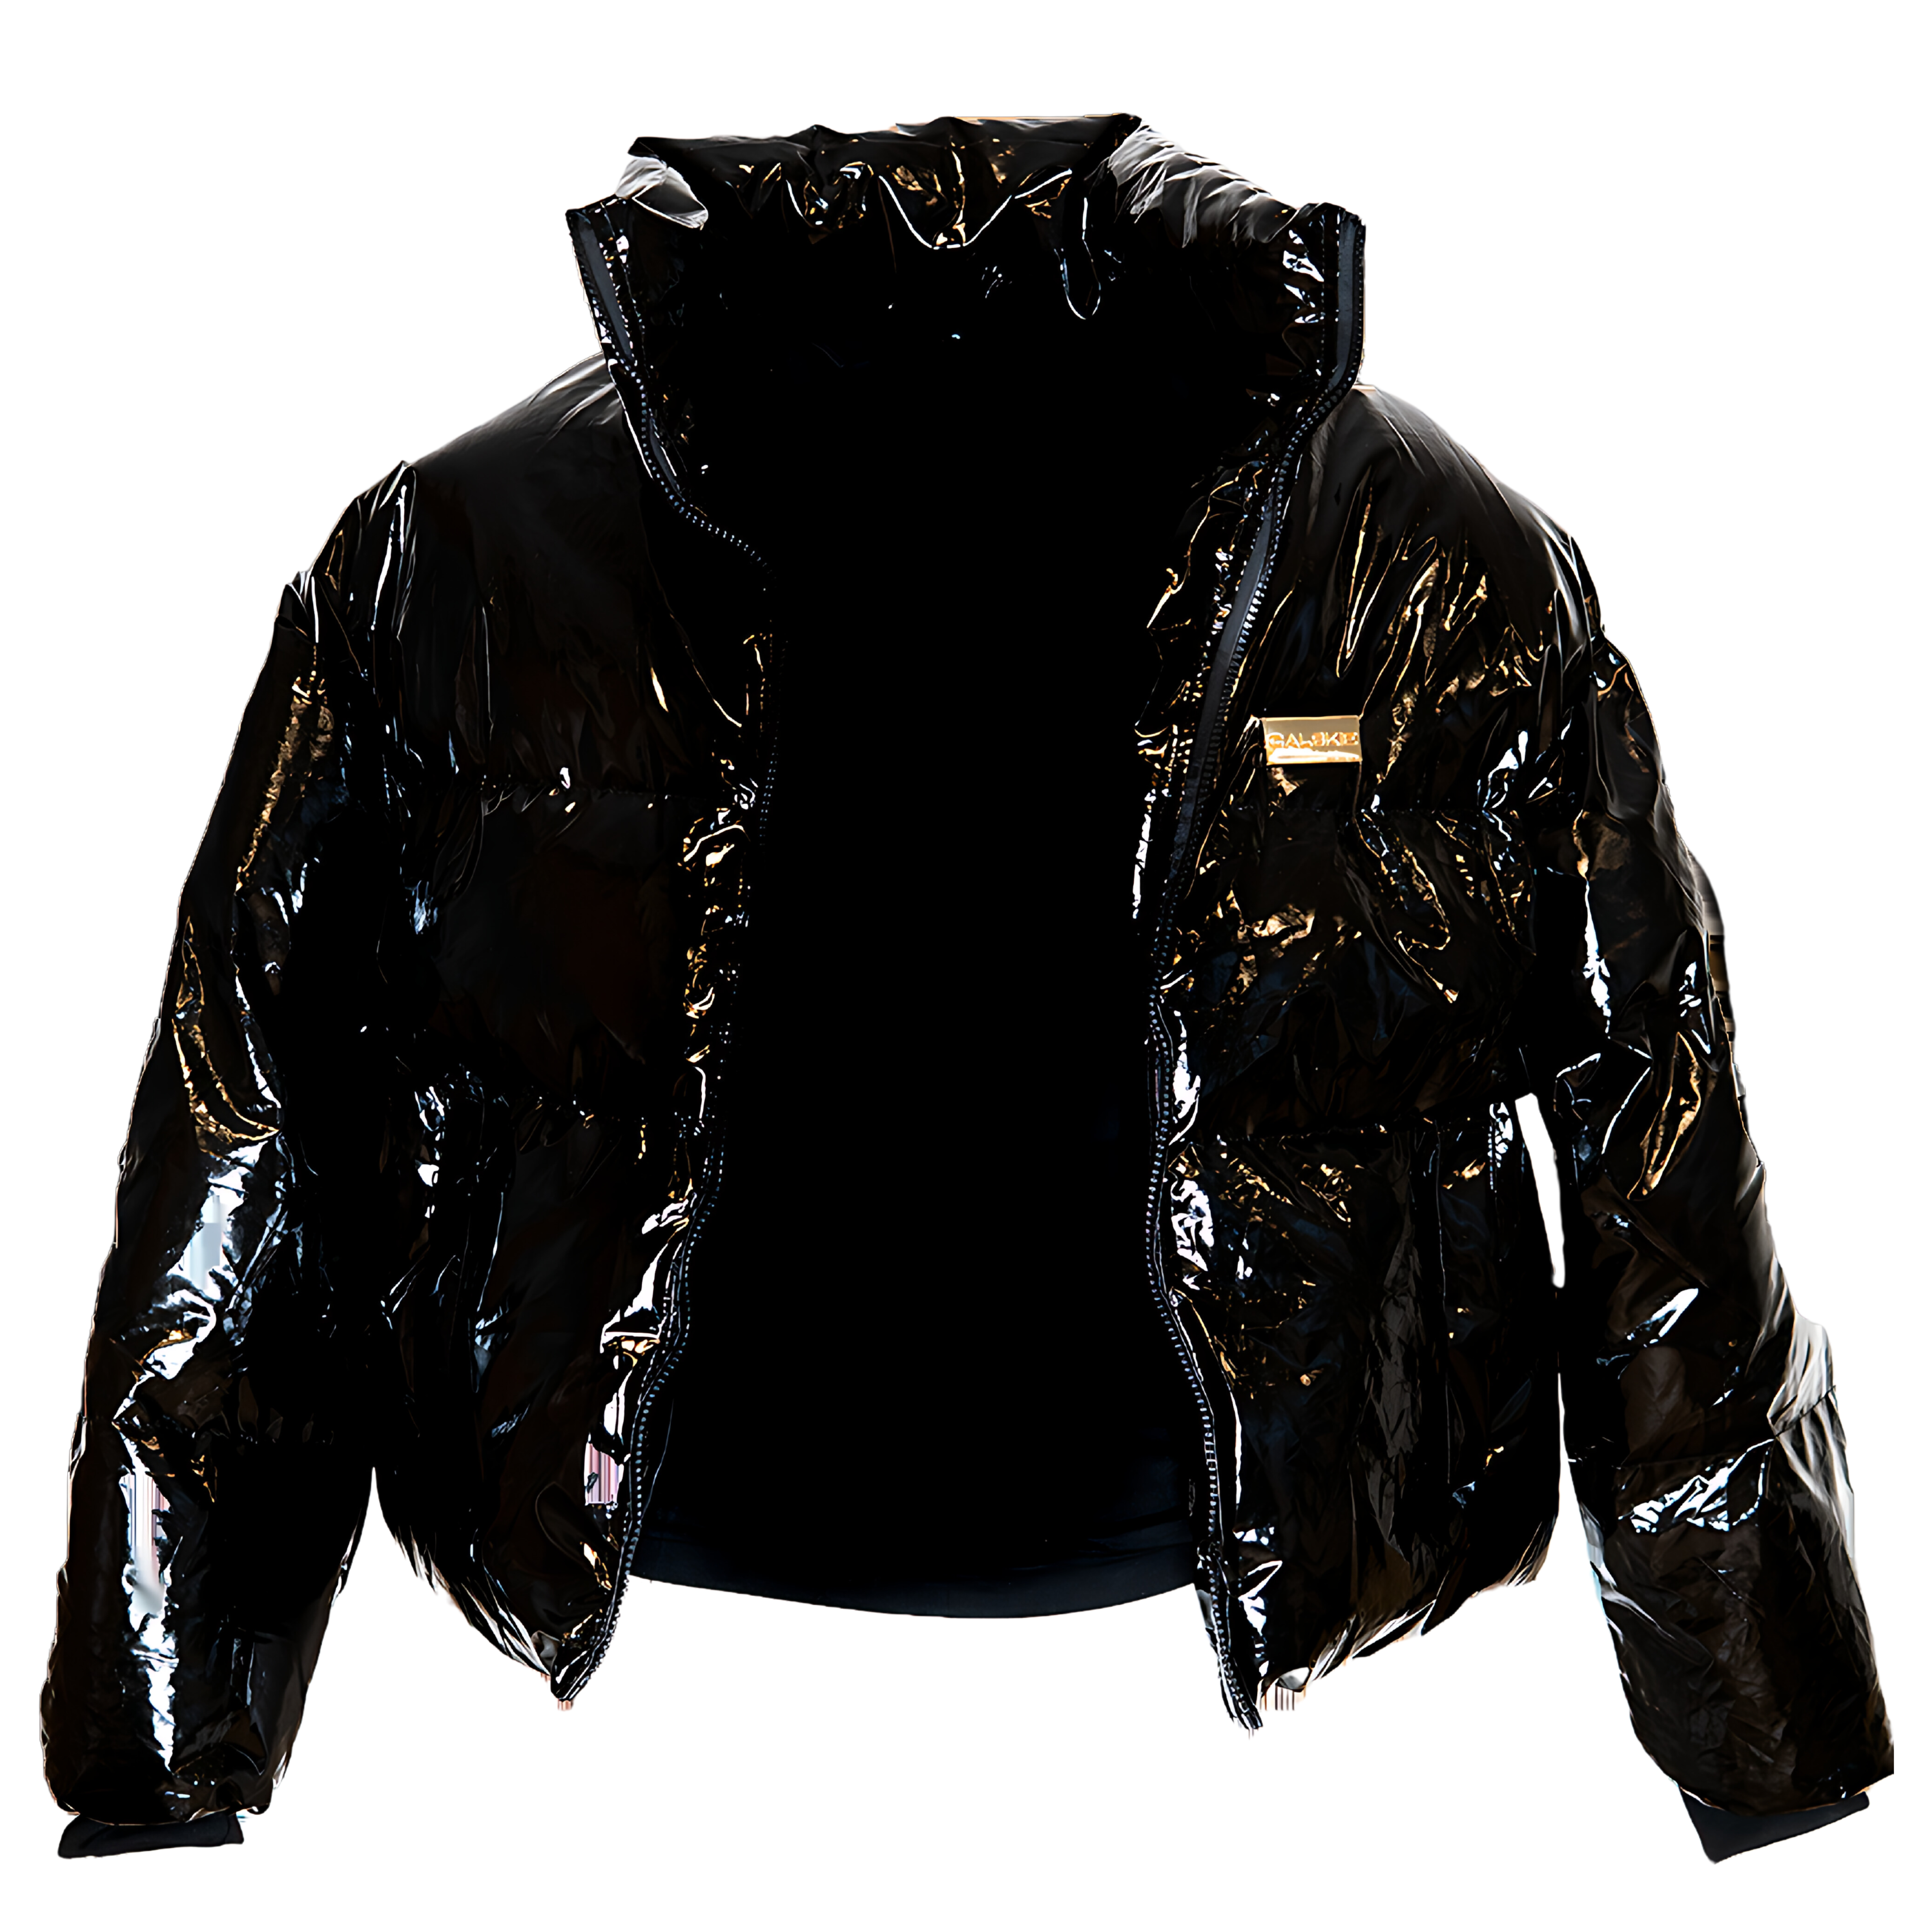 An image showing the front of the Calskie Shiny Puffer Jacket, featuring the iconic gold Calskie logo on the chest.